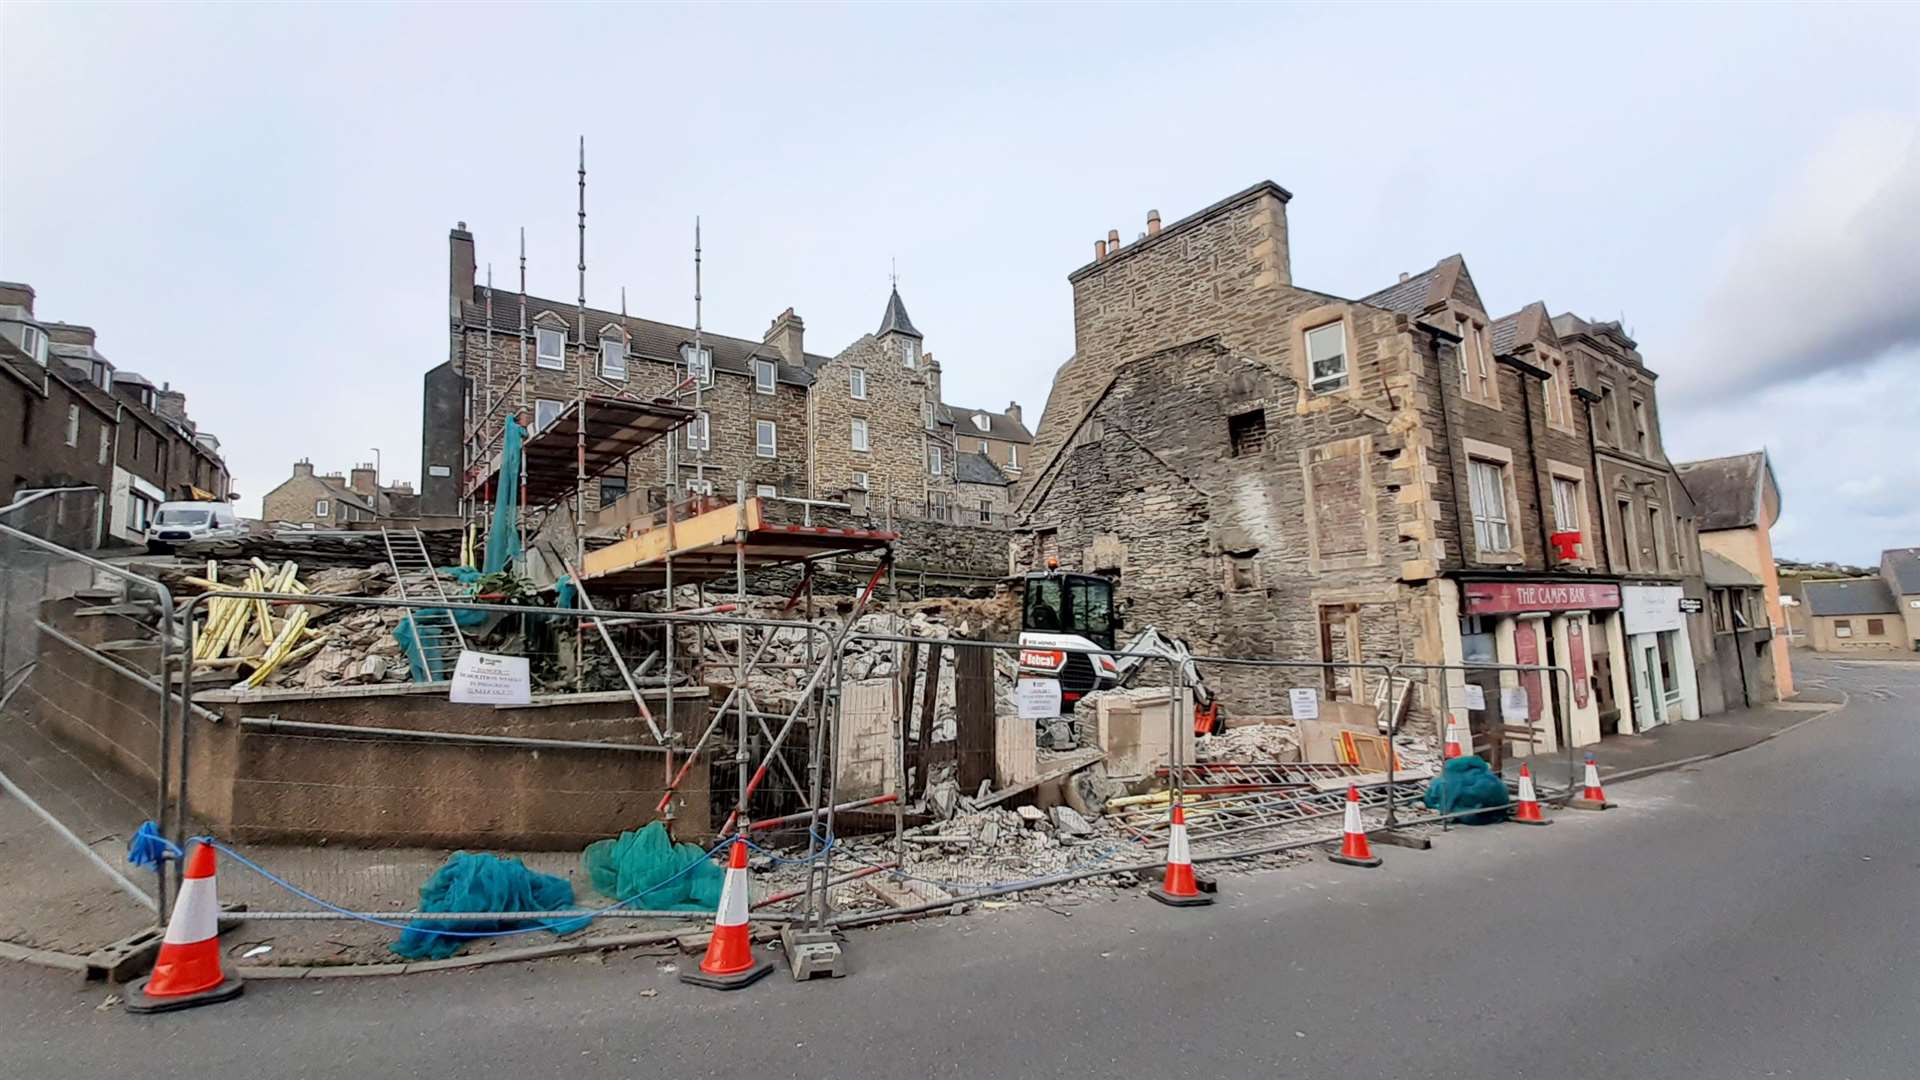 After demolition, the gable end is left exposed and is deemed to need further work done to make it secure. Picture: Alan Hendry